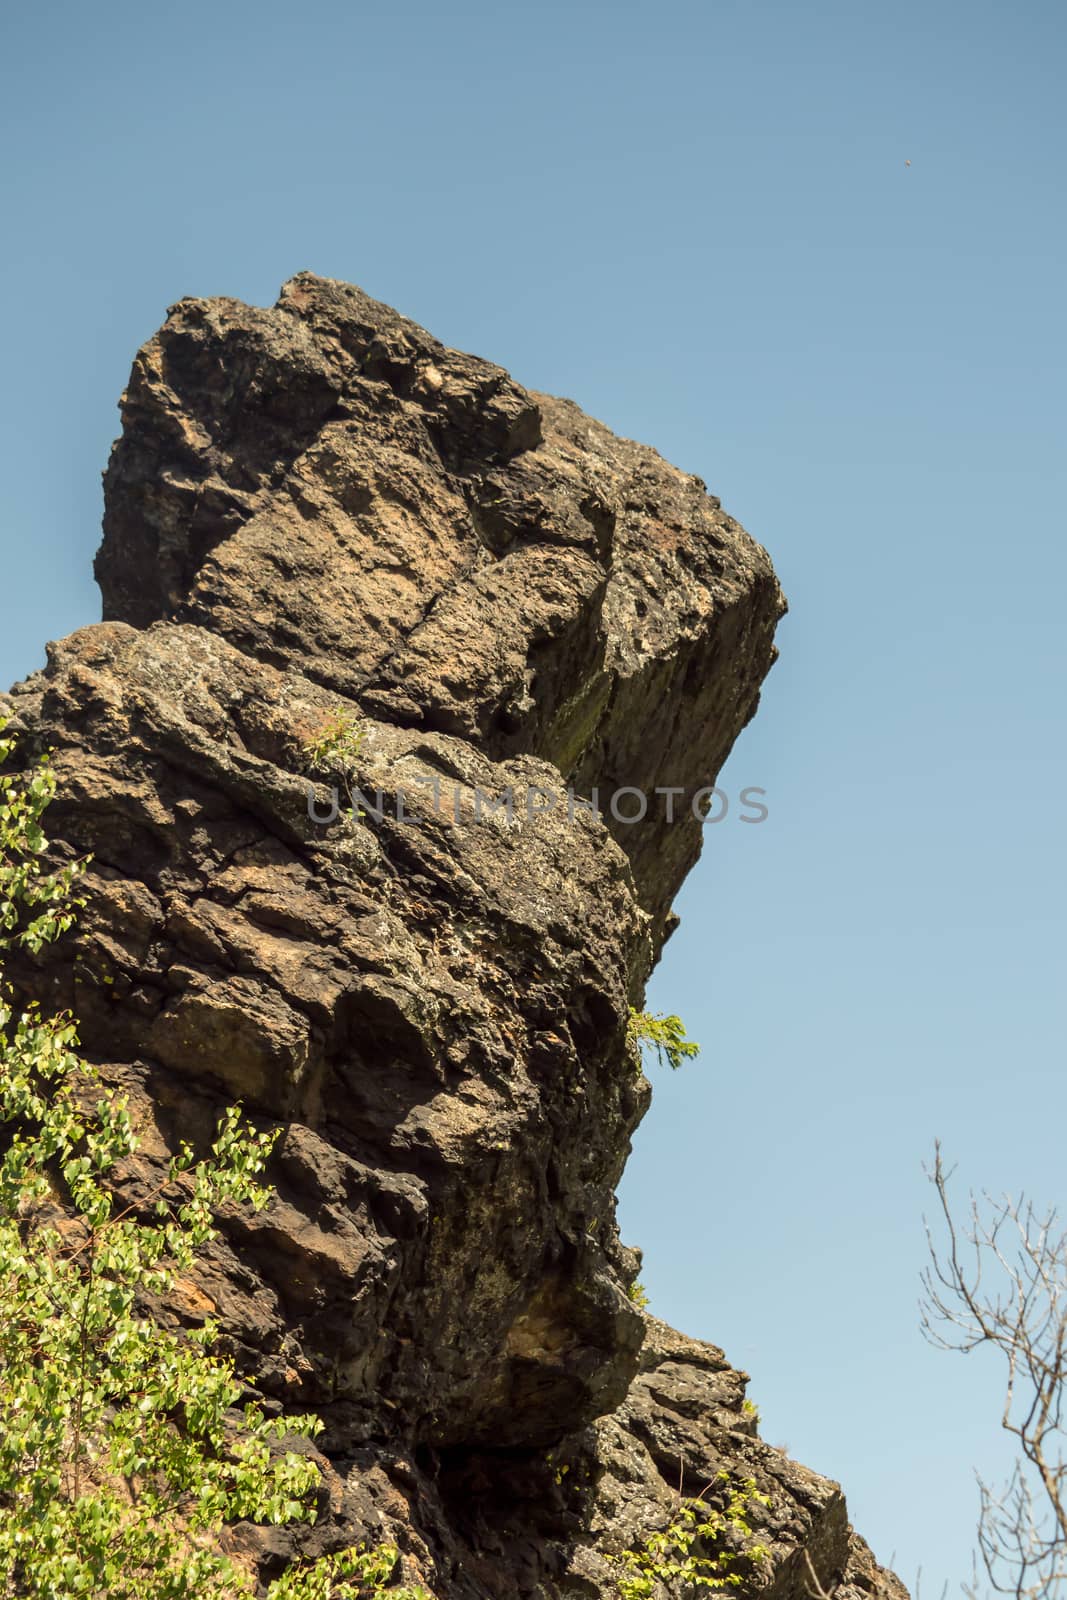 Giant rocks on a mountain with blue sky by sandra_fotodesign